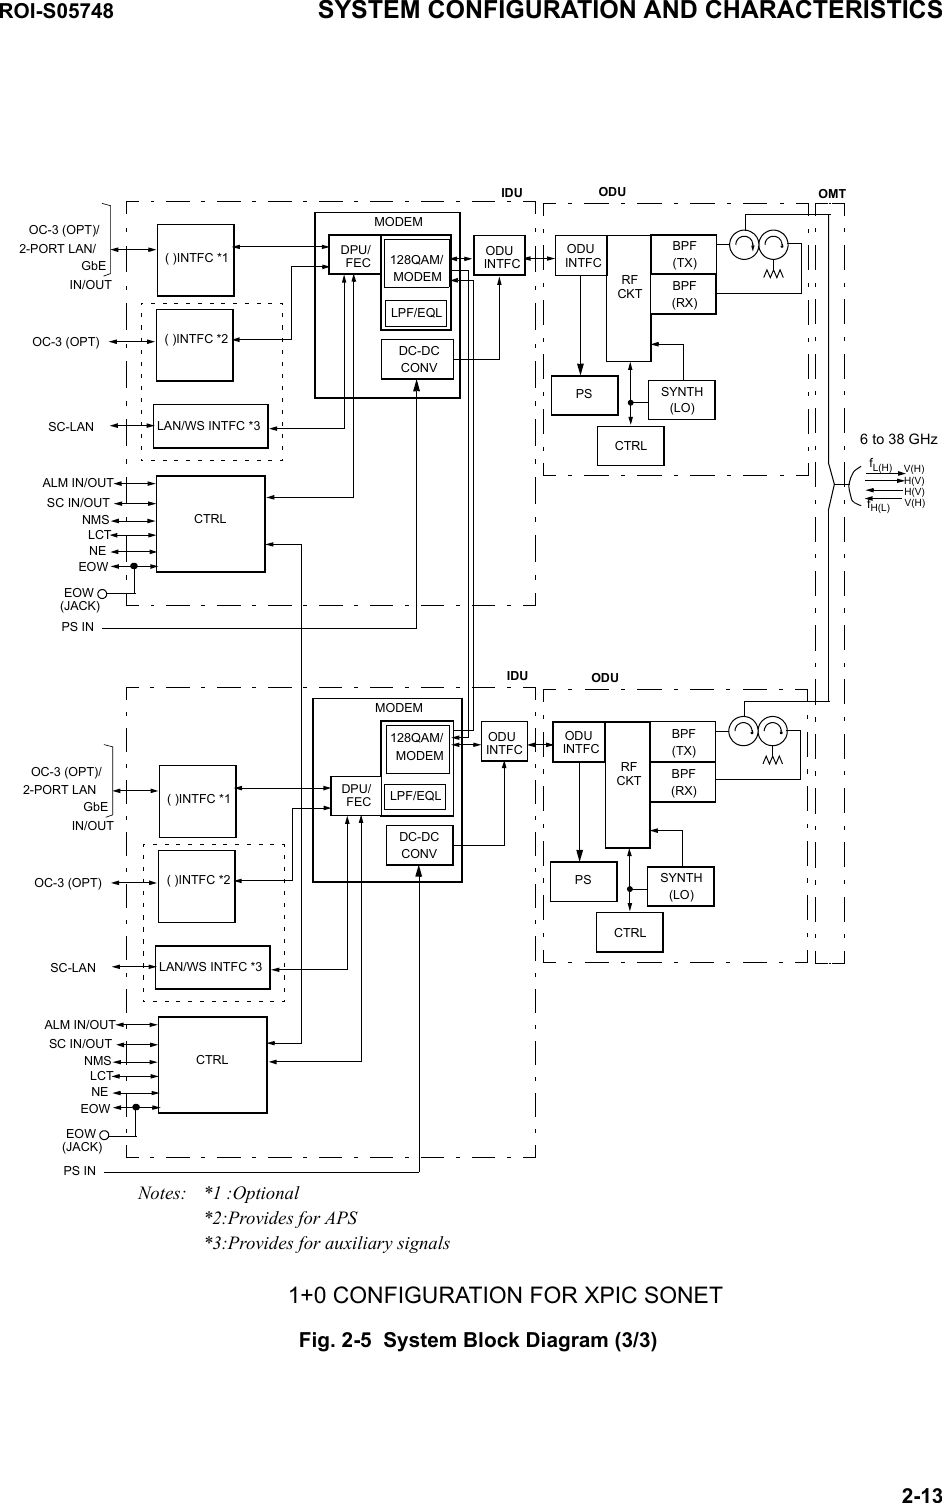 Fig. 2-5  System Block Diagram (3/3)RFPSCKTSYNTH(LO)CTRLODUBPF(TX)BPF(RX)ODUINTFC1+0 CONFIGURATION FOR XPIC SONETRFPSCKTSYNTH(LO)CTRLODUBPF(TX)BPF(RX)ODUINTFCfH(L)fL(H)6 to 38 GHzOMTIN/OUT( )INTFC *1CTRLNMSLCTEOWMODEMDC-DCCONVLAN/WS INTFC *3SC-LANIDUALM IN/OUTOC-3 (OPT)/ODUINTFCDPU/FECSC IN/OUTNE128QAM/MODEM( )INTFC *2OC-3 (OPT)2-PORT LAN/GbEEOW(JACK)MODEMDC-DCCONVODUINTFCDPU/FECMODEM128QAM/H(V)V(H)V(H)H(V)IN/OUT( )INTFC *1CTRLNMSLCTEOWLAN/WS INTFC *3SC-LANALM IN/OUTOC-3 (OPT)/SC IN/OUTNE( )INTFC *2OC-3 (OPT)2-PORT LANGbEEOW(JACK)IDULPF/EQLLPF/EQLPS INPS INNotes: *1 :Optional*2:Provides for APS*3:Provides for auxiliary signalsROI-S05748 SYSTEM CONFIGURATION AND CHARACTERISTICS2-13